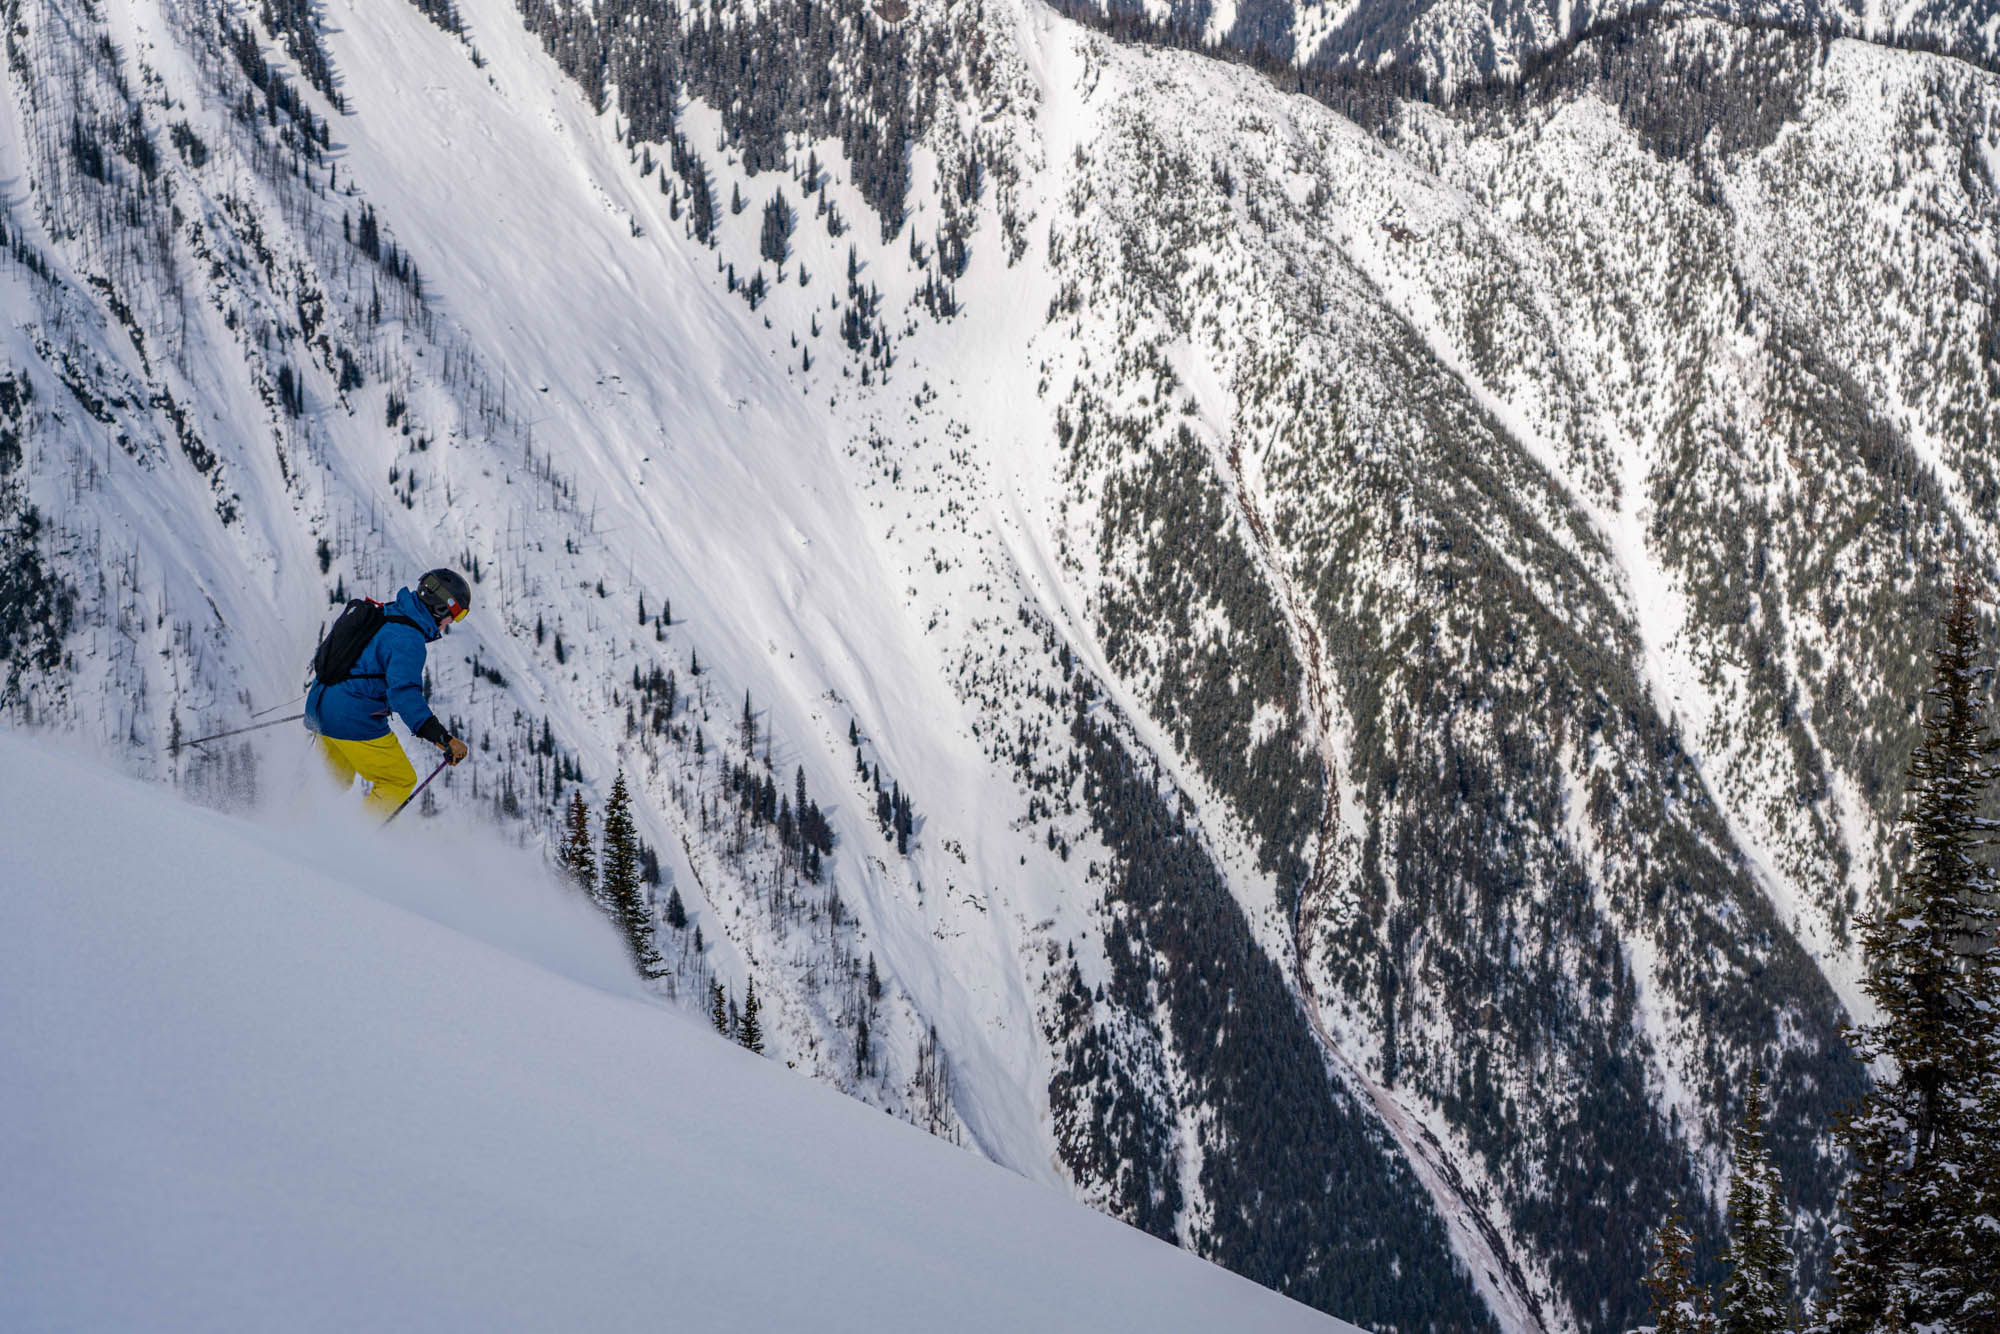 steep skiing in BC's Selkirk Mountains, with White Grizzly Cat Skiing